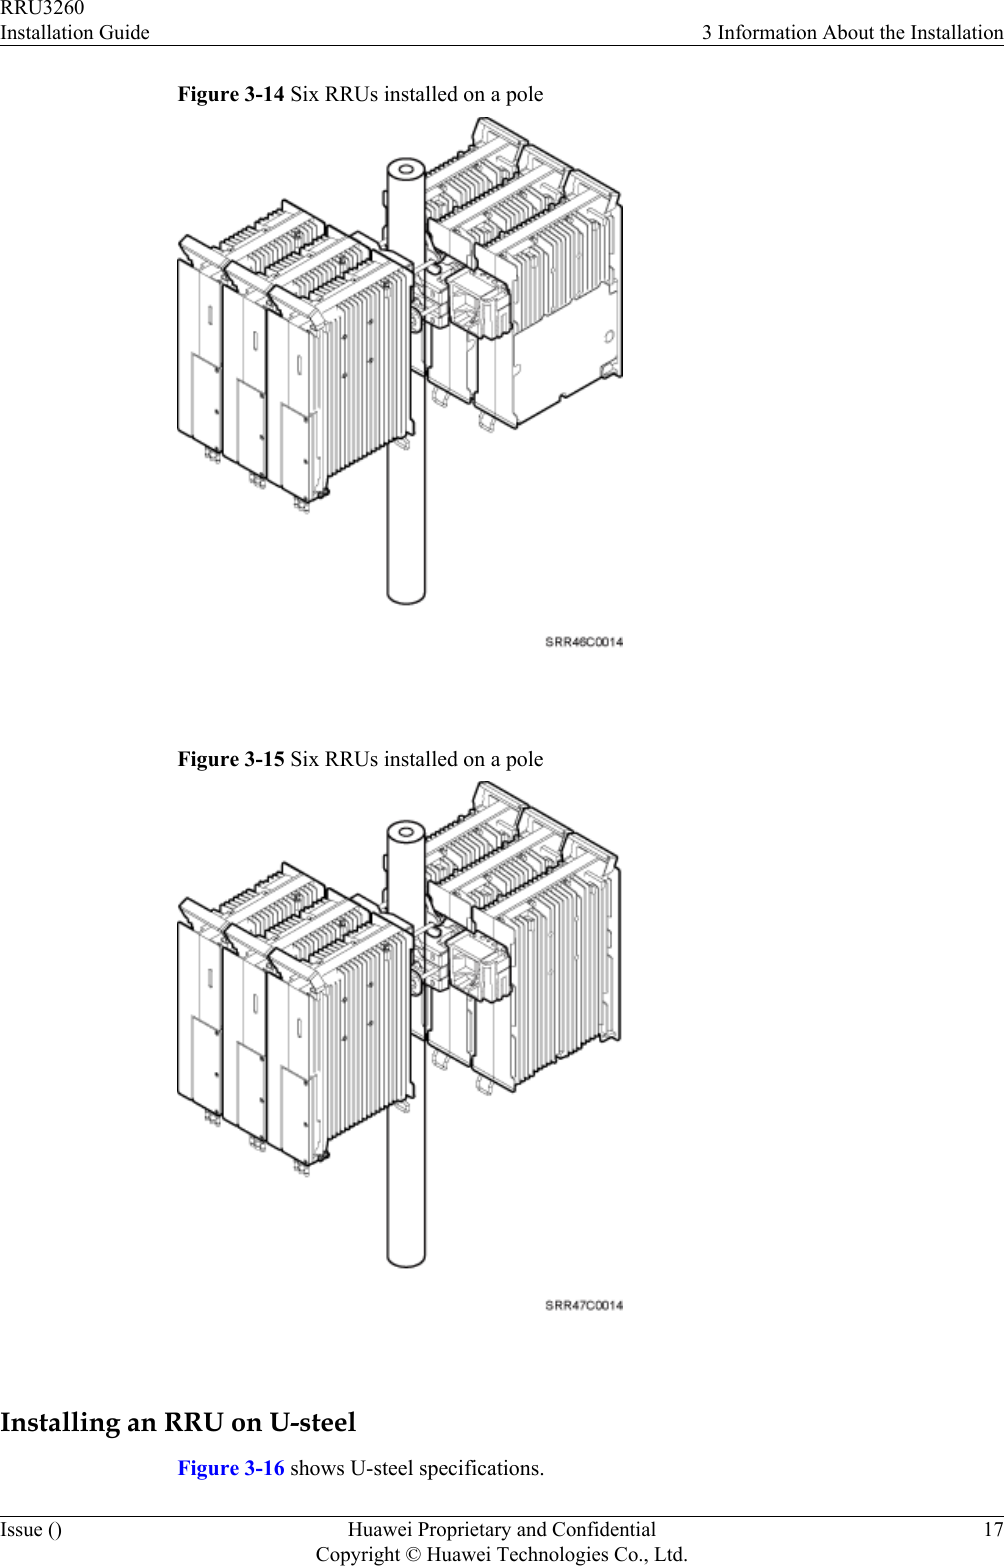 Figure 3-14 Six RRUs installed on a pole Figure 3-15 Six RRUs installed on a pole Installing an RRU on U-steelFigure 3-16 shows U-steel specifications.RRU3260Installation Guide 3 Information About the InstallationIssue () Huawei Proprietary and ConfidentialCopyright © Huawei Technologies Co., Ltd.17